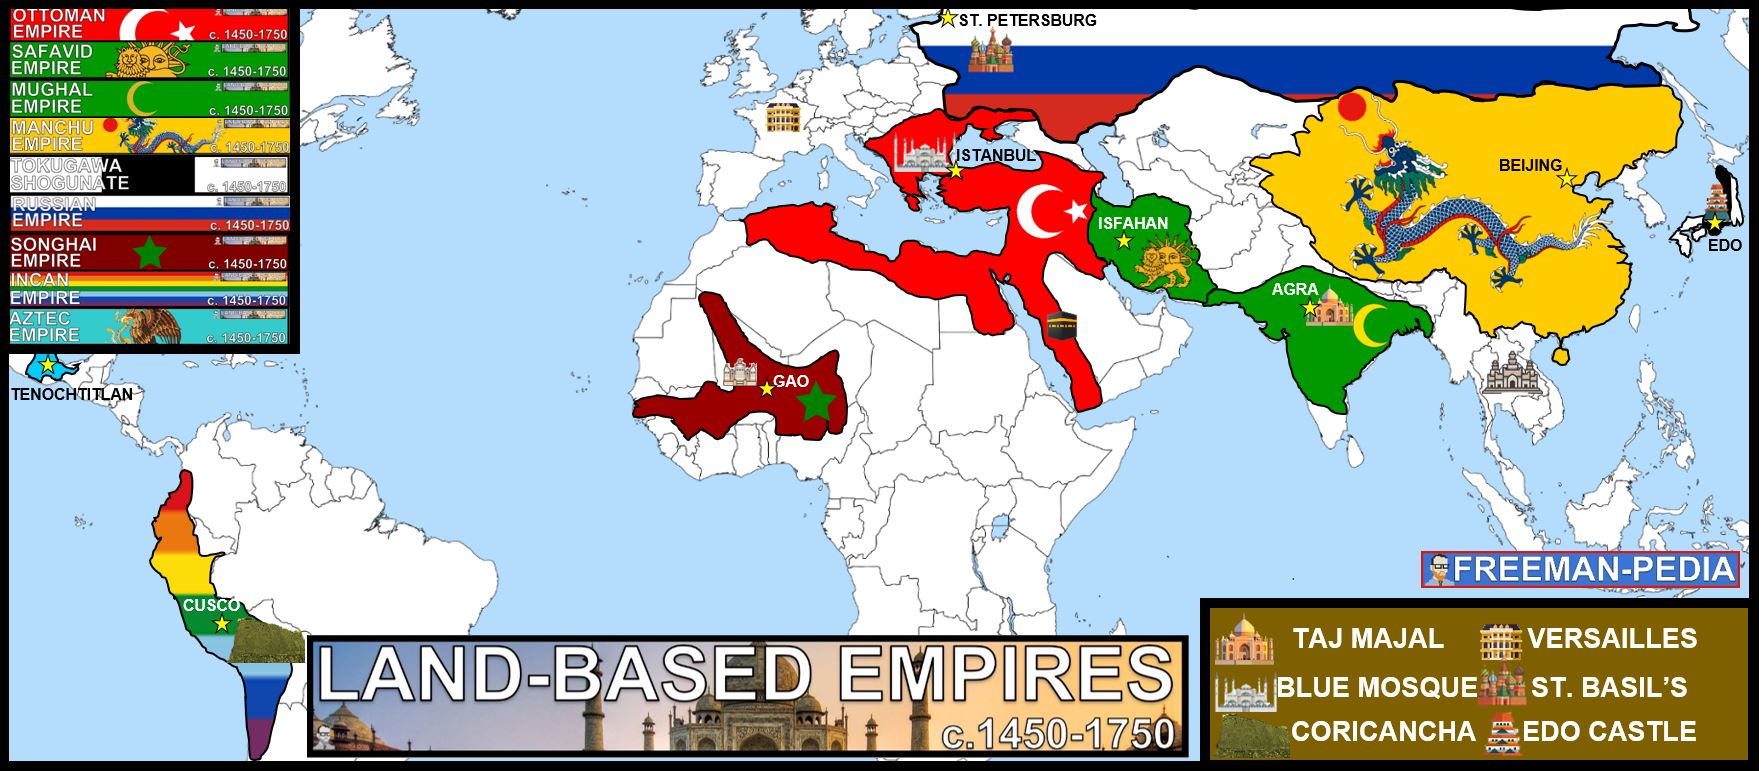 Land of Empires